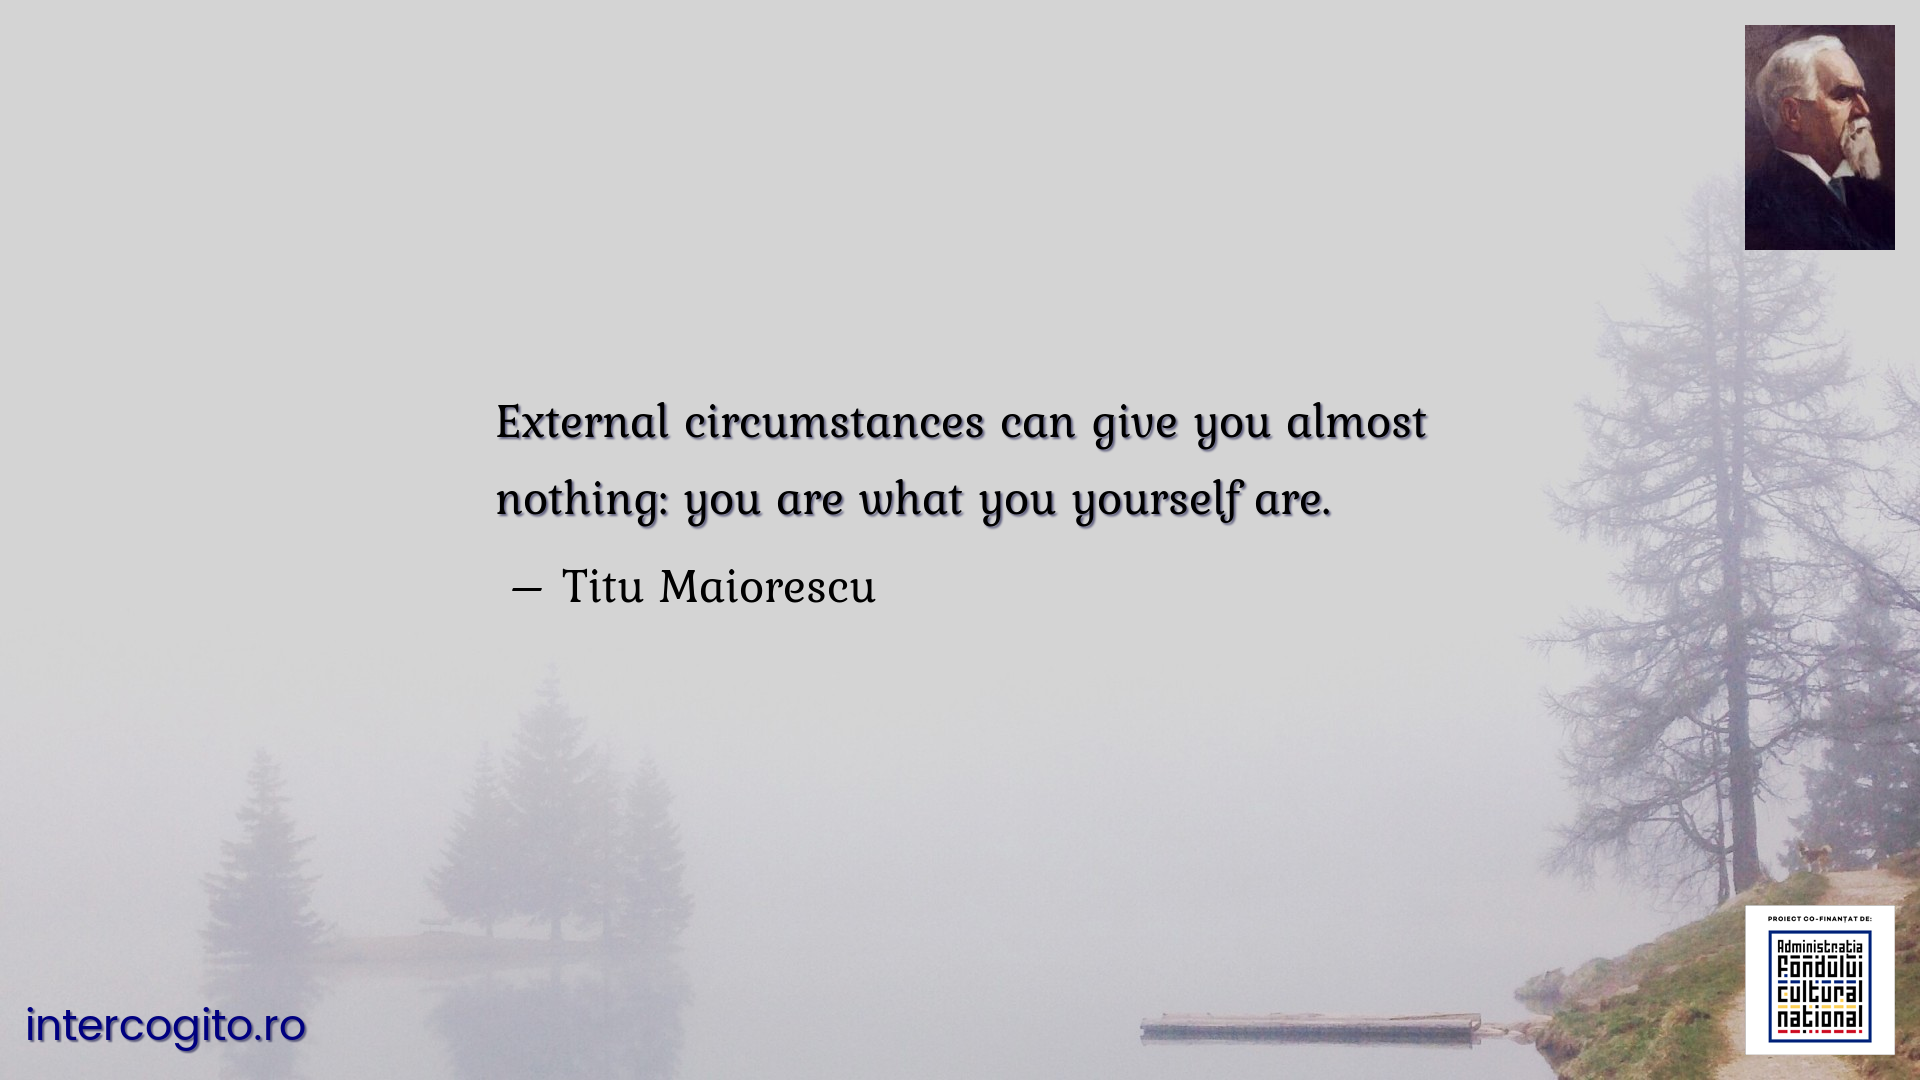 External circumstances can give you almost nothing: you are what you yourself are.